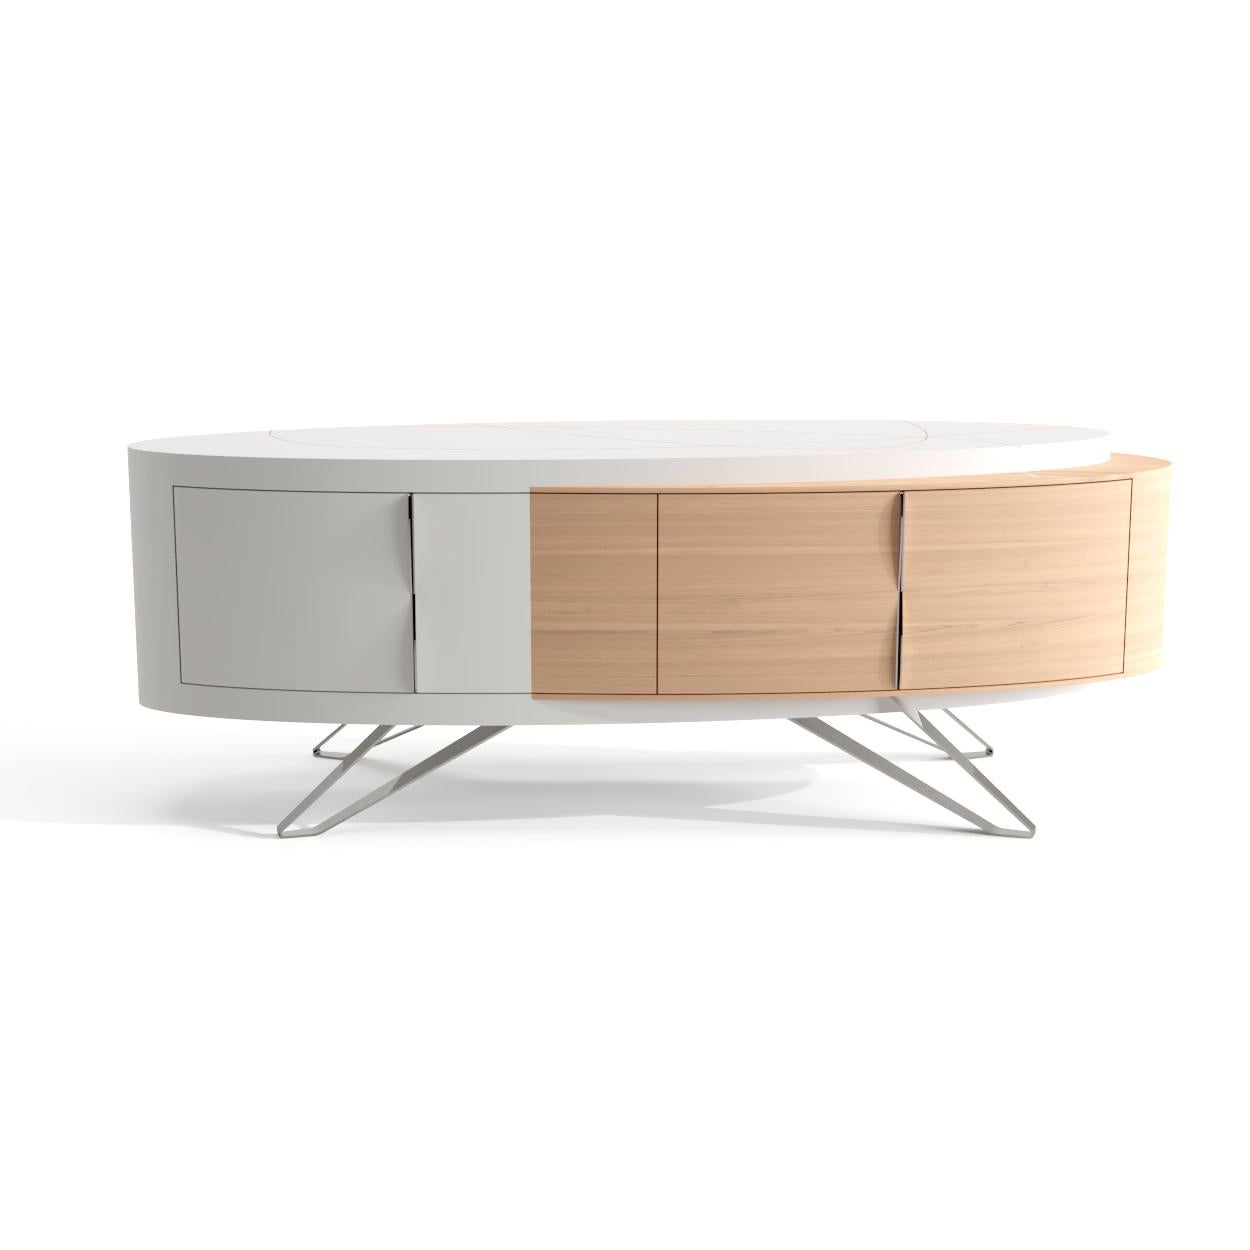 This sideboard is the star piece of the Orbit collection and is perfect for relaxed home designs, full of light and personality.

It has an oval shape, with oak wood and white lacquered wood interconnected on its body and four front doors. The feet